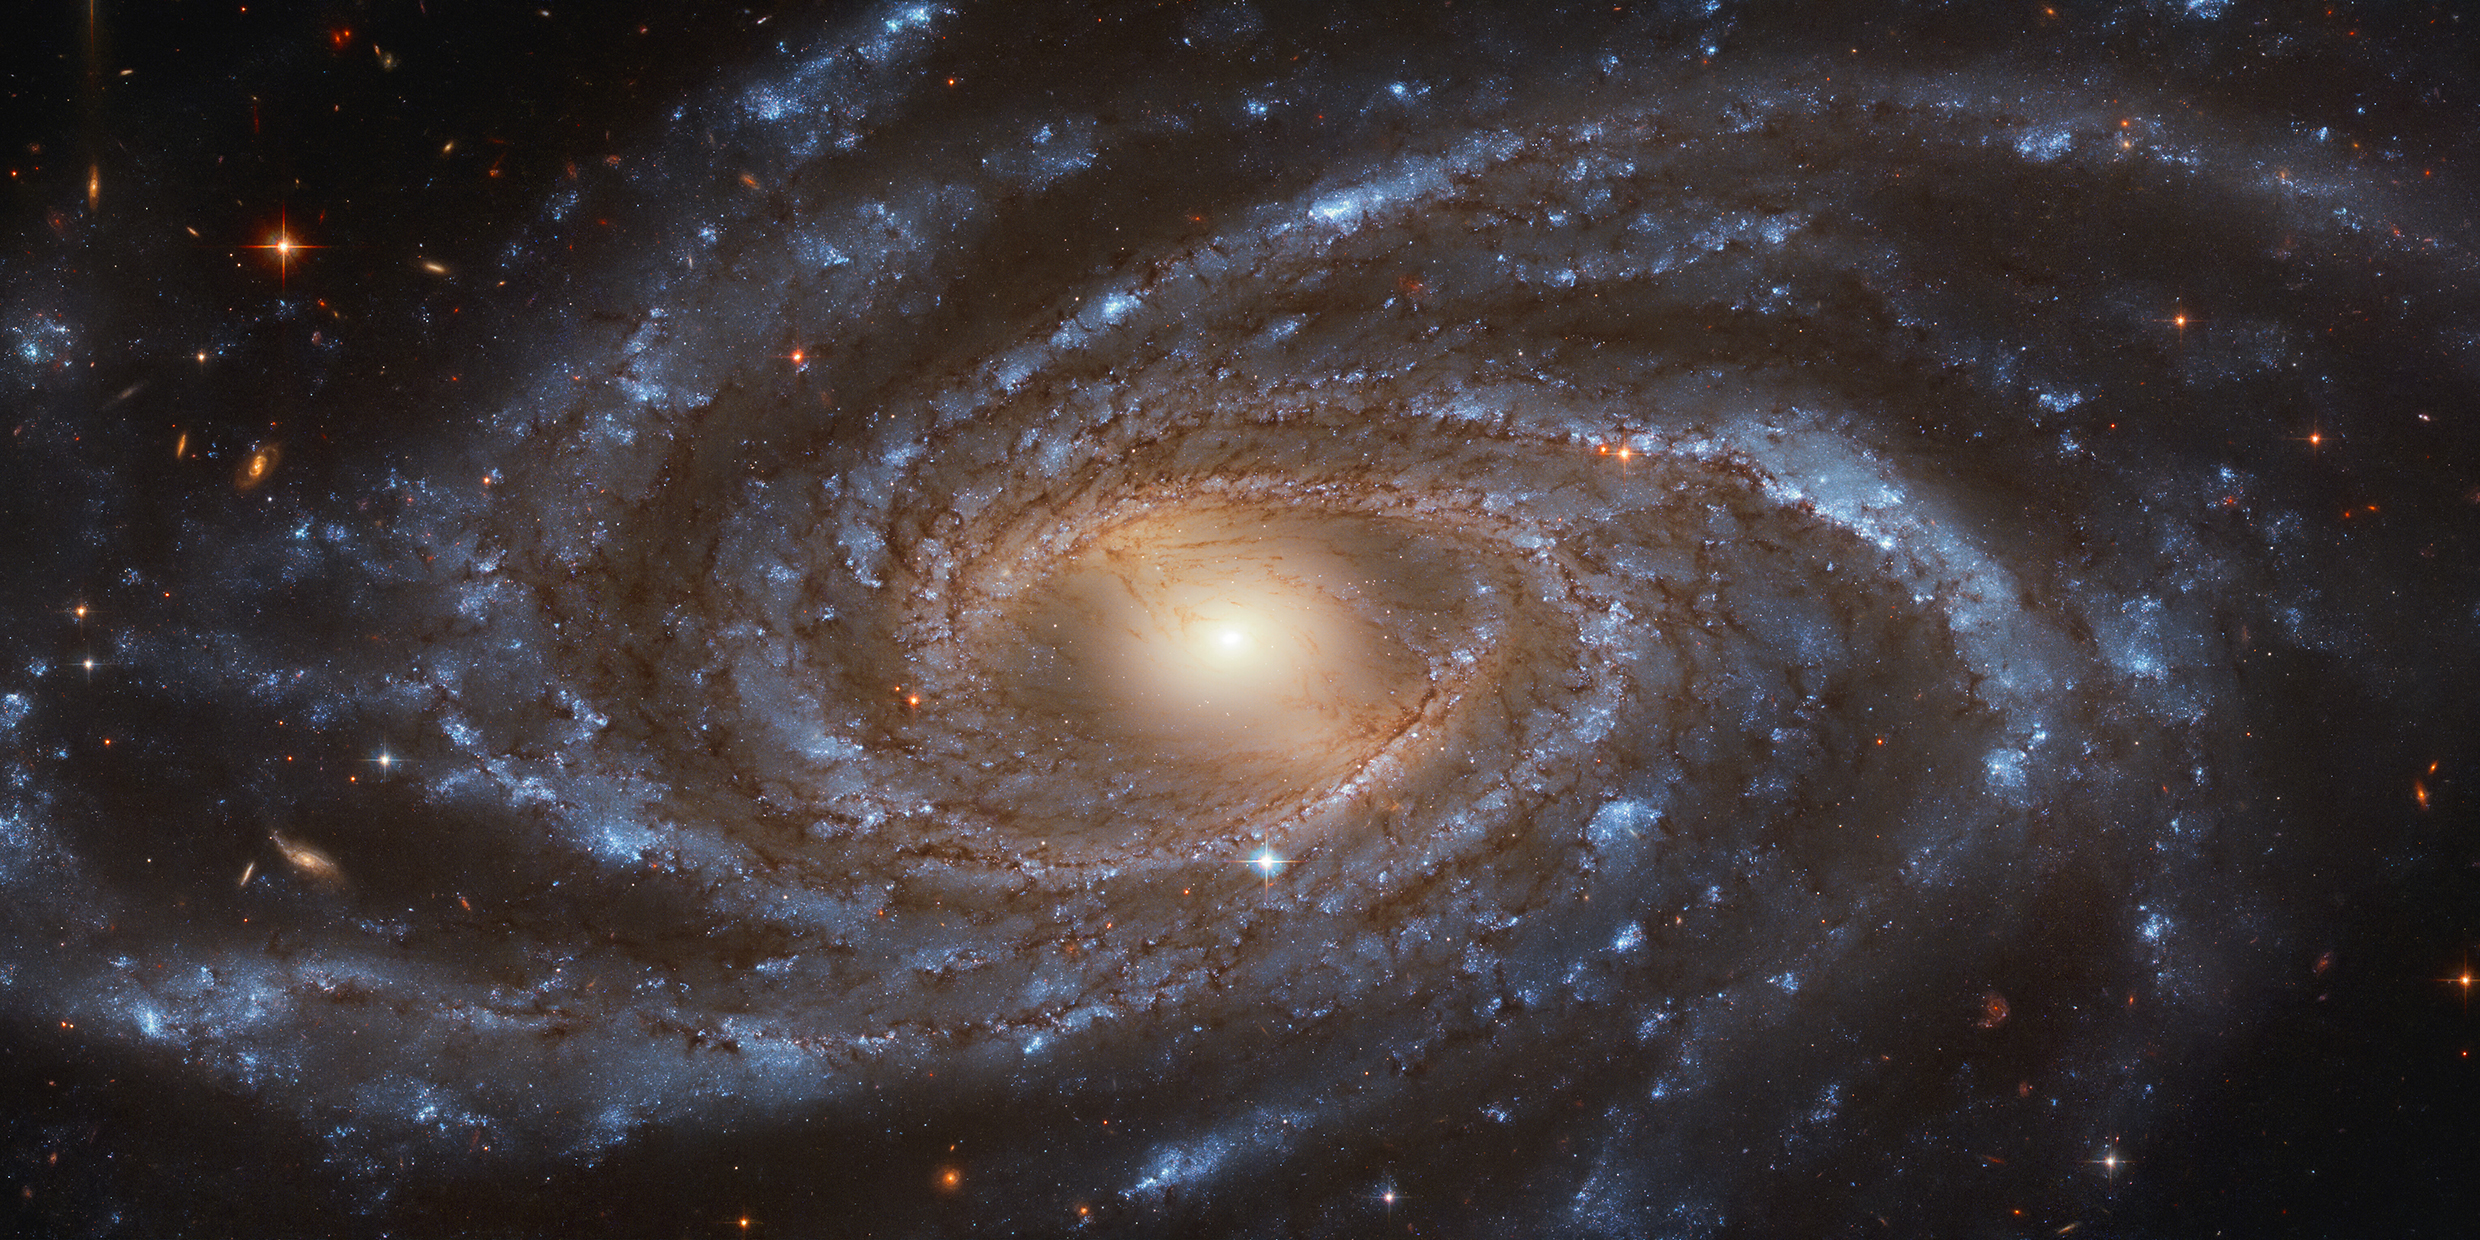 Hubble telescope image of a spiral galaxy